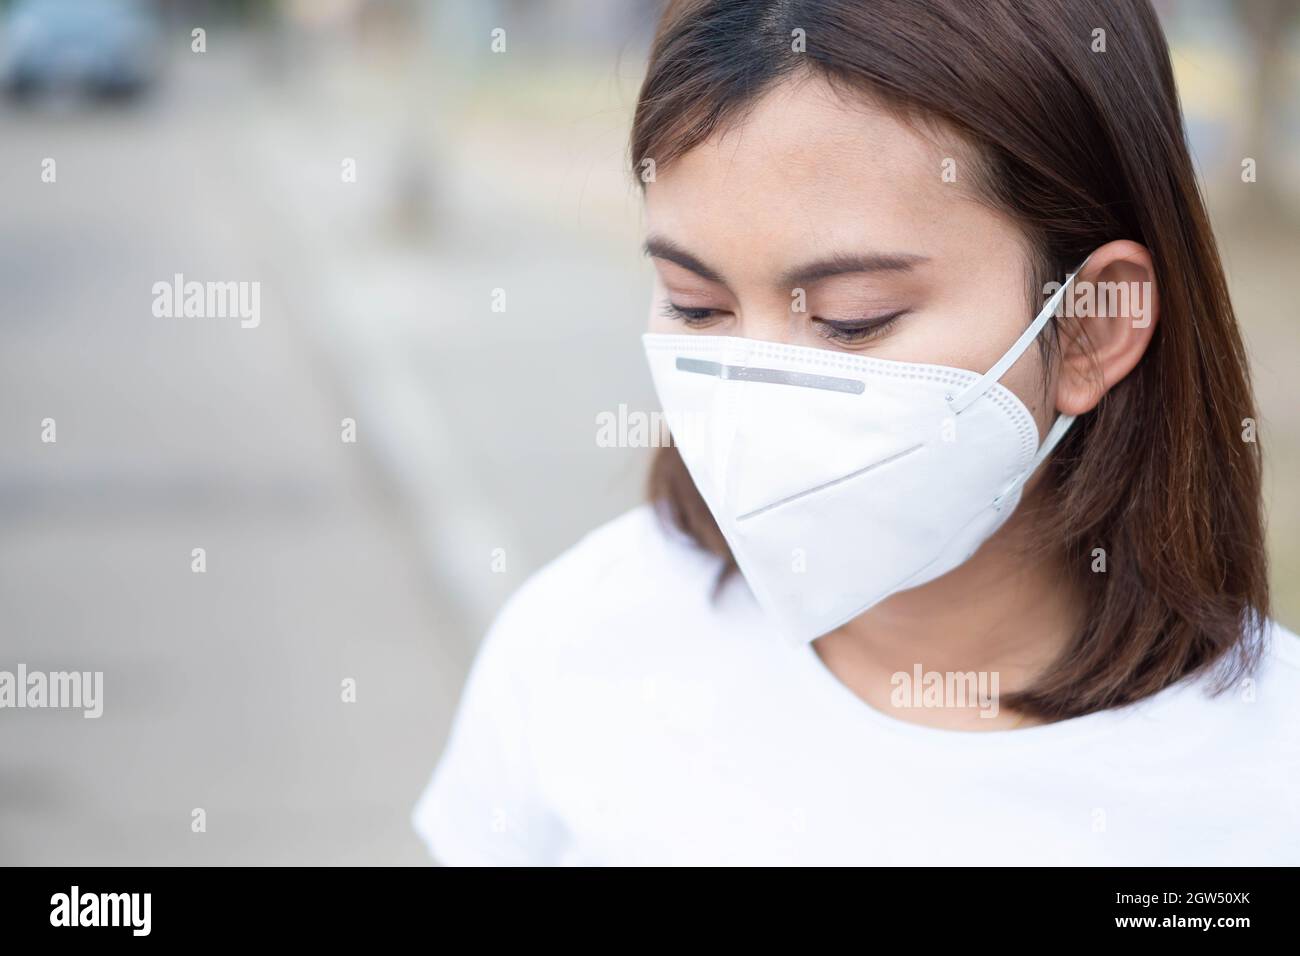 Mid Adult Woman Wearing Protective Mask Outdoors Stock Photo